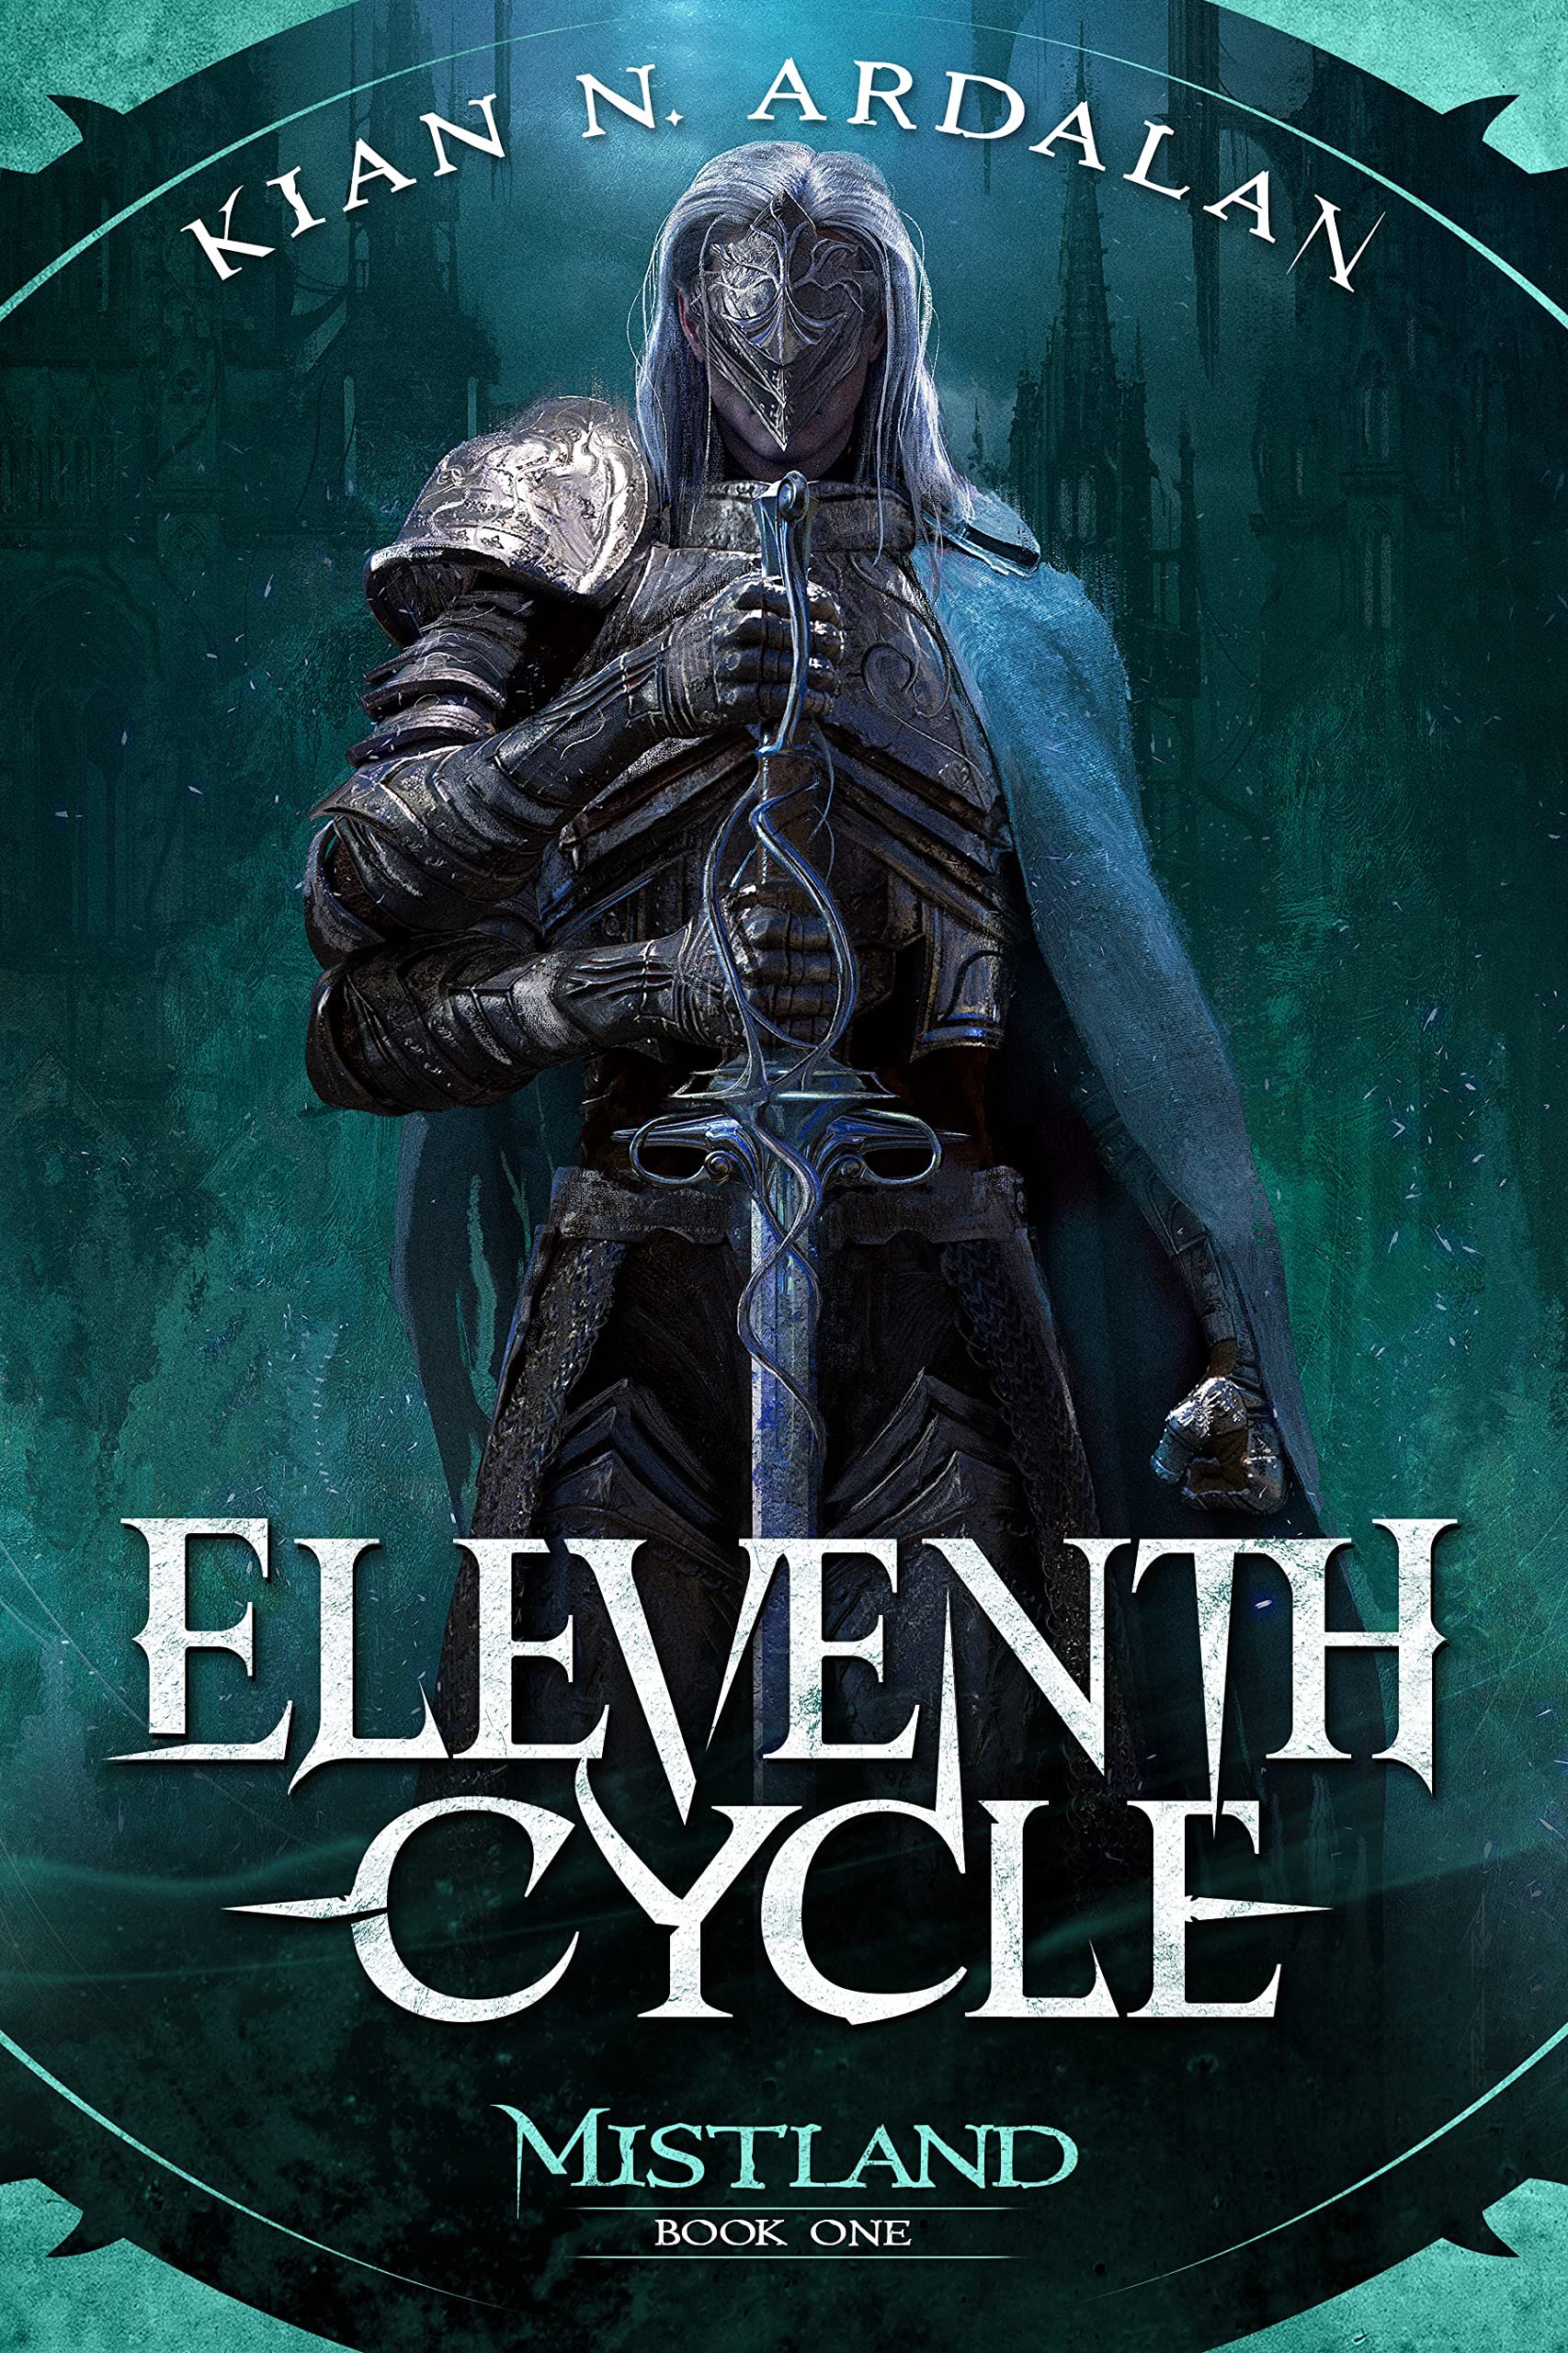 eleventh cycle_cover thumb.jpg